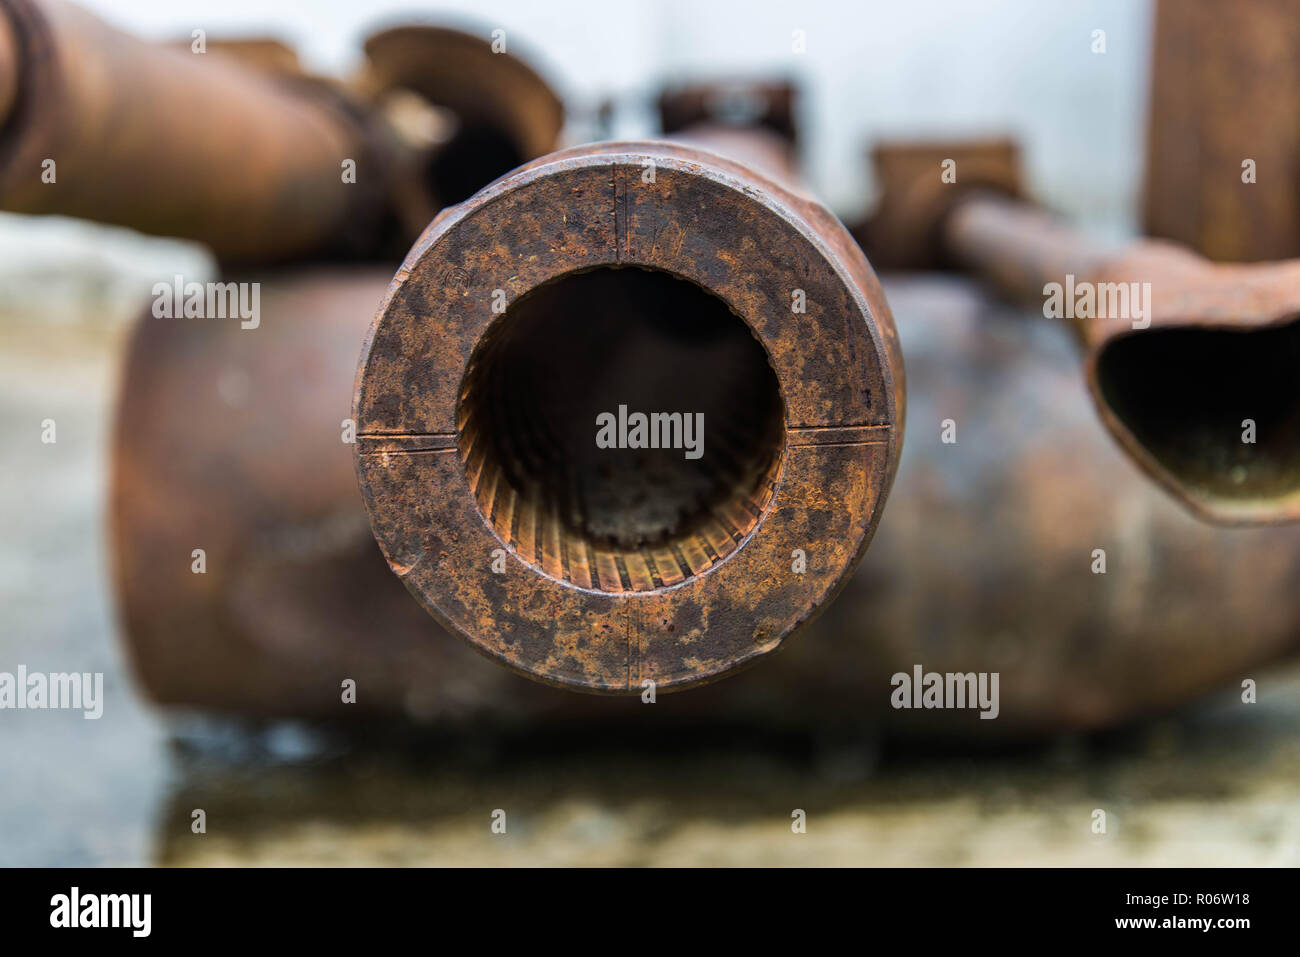 Unexploded Ordnance (UXO) in Laos after the Vietnam War Stock Photo